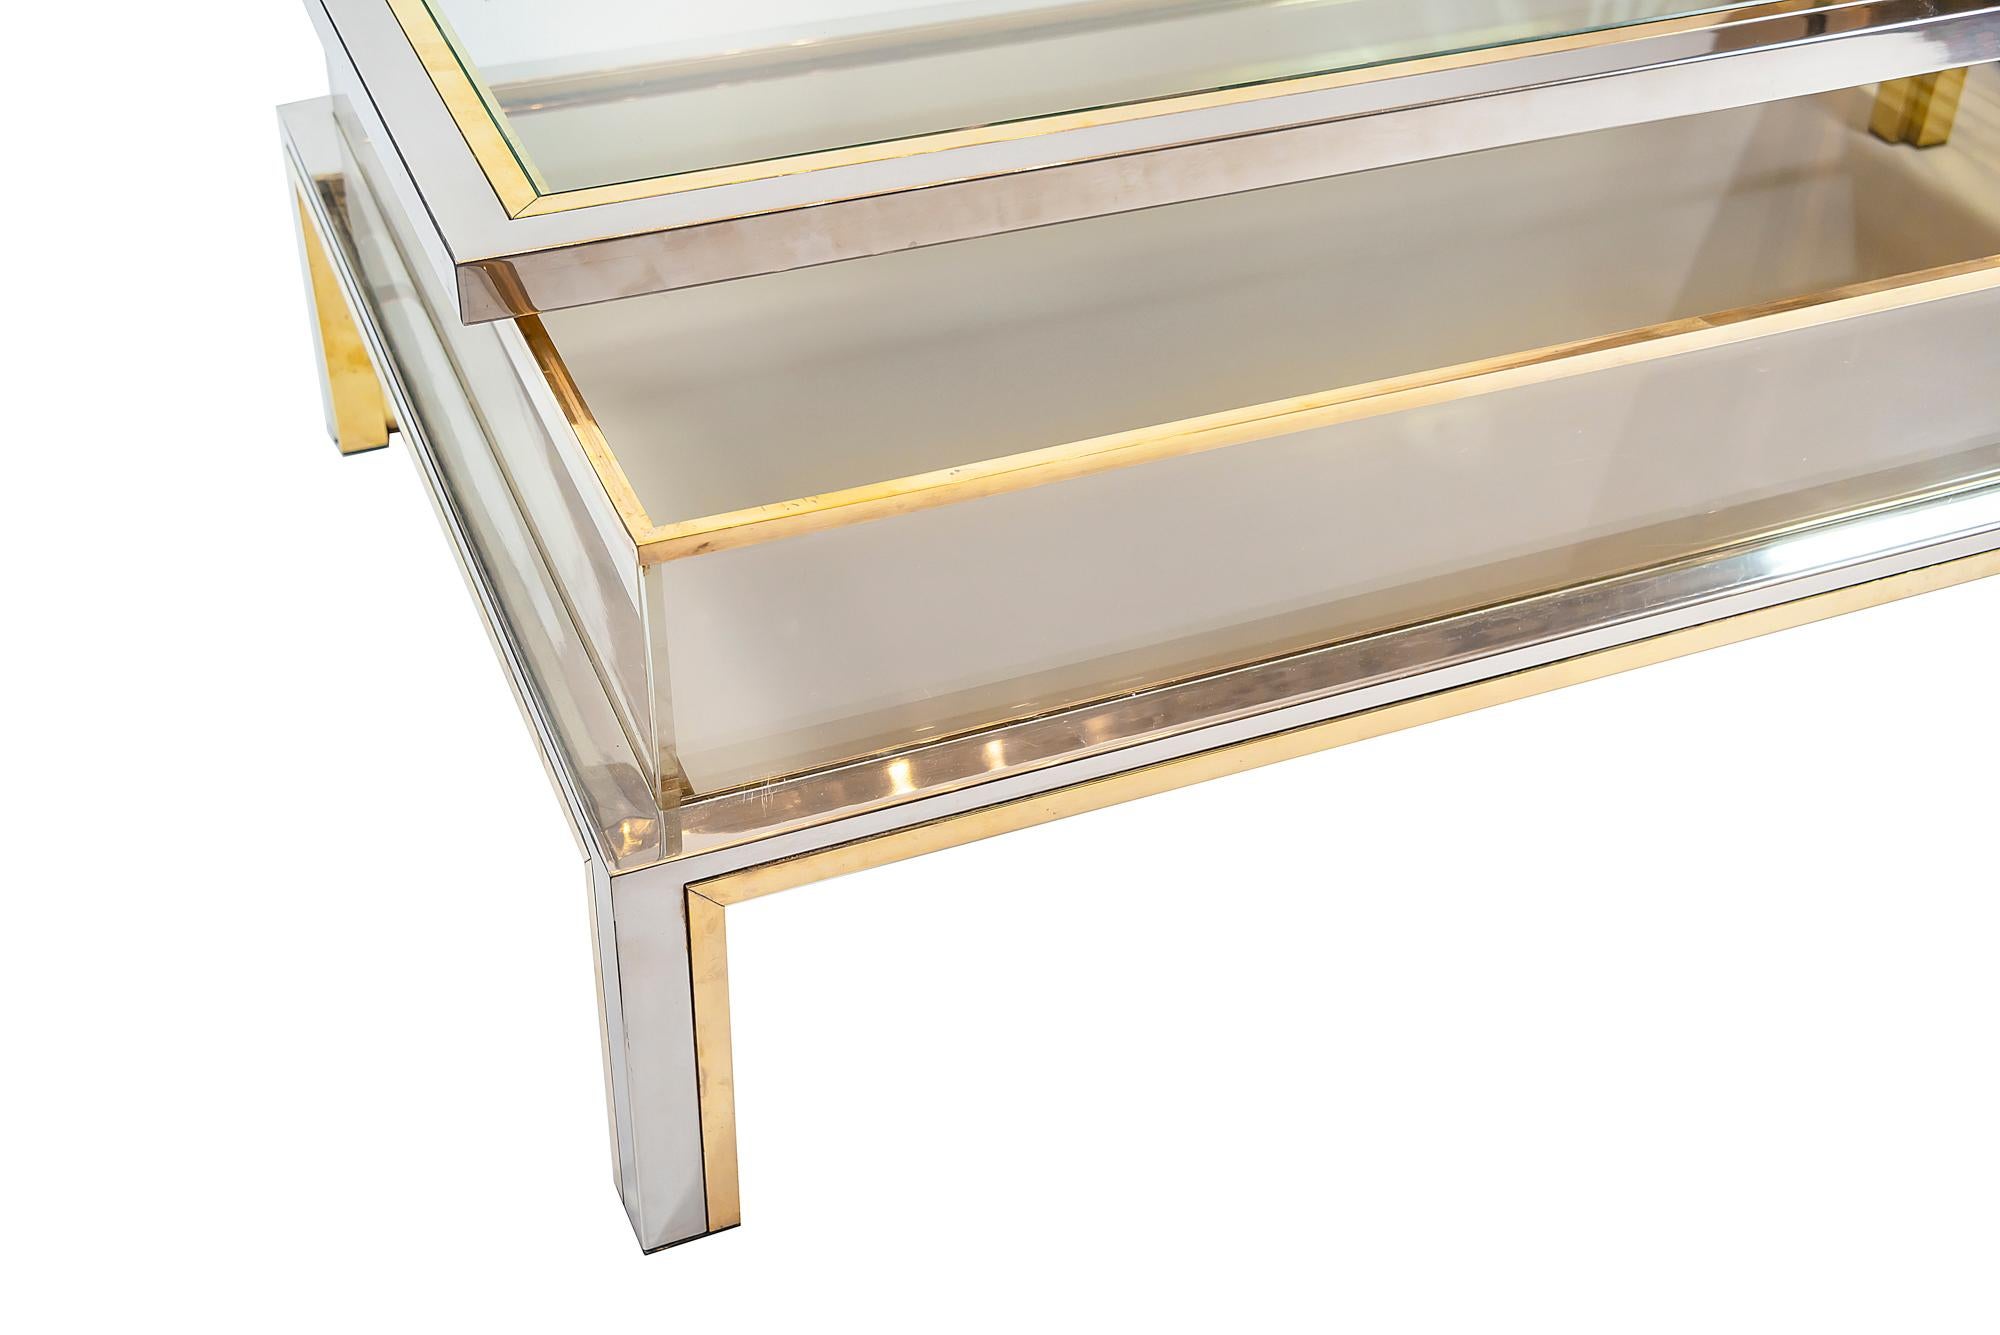 Italian midcentury brass and glass coffee table - showcase by Romeo Rega. The top of this table is with showcase function and opens to one side. Signature 